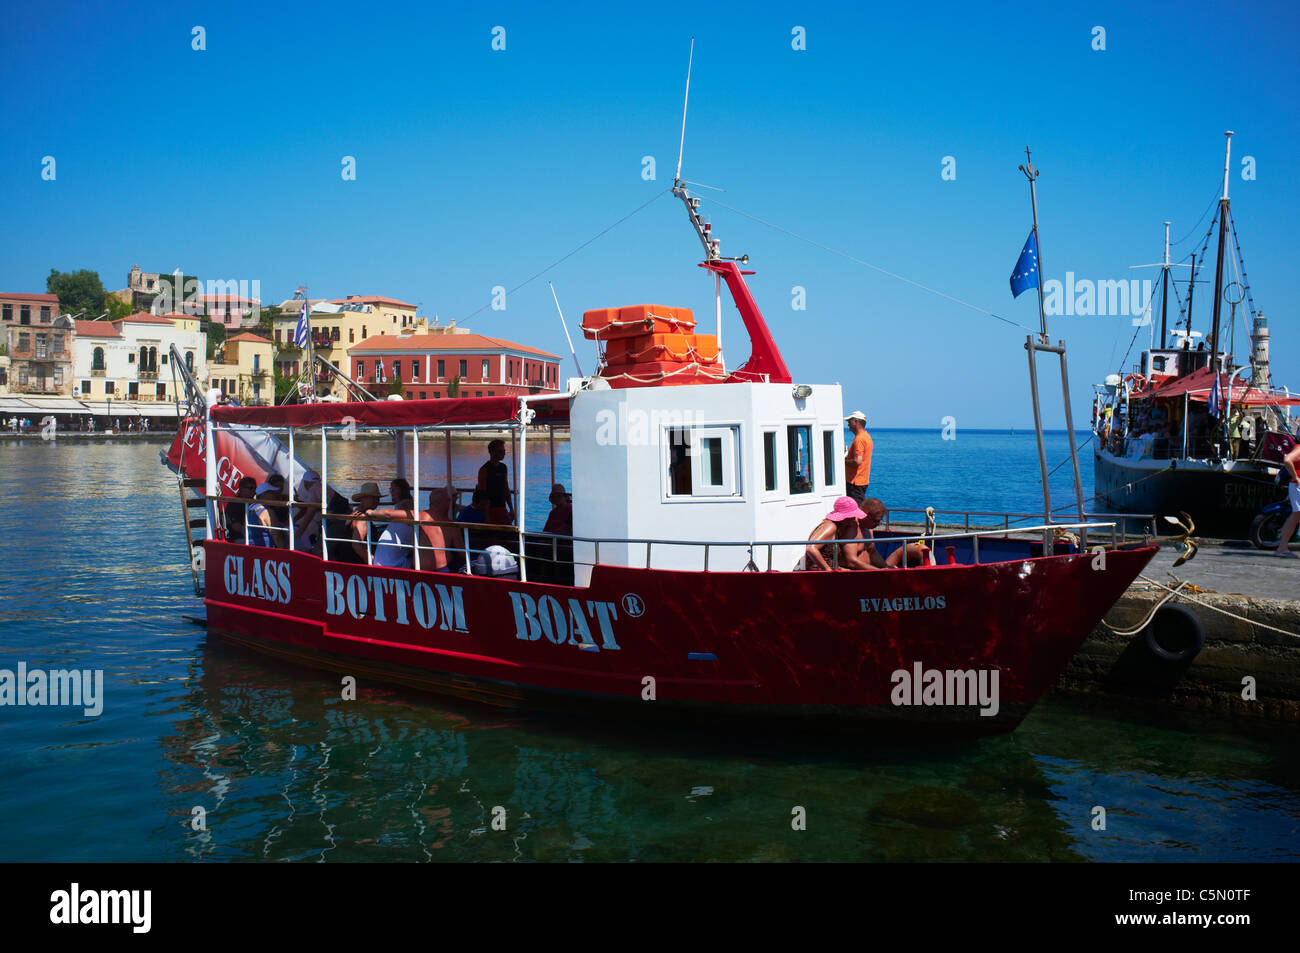 Glass bottom boat within the old harbour of Chania Crete Stock Photo - Alamy